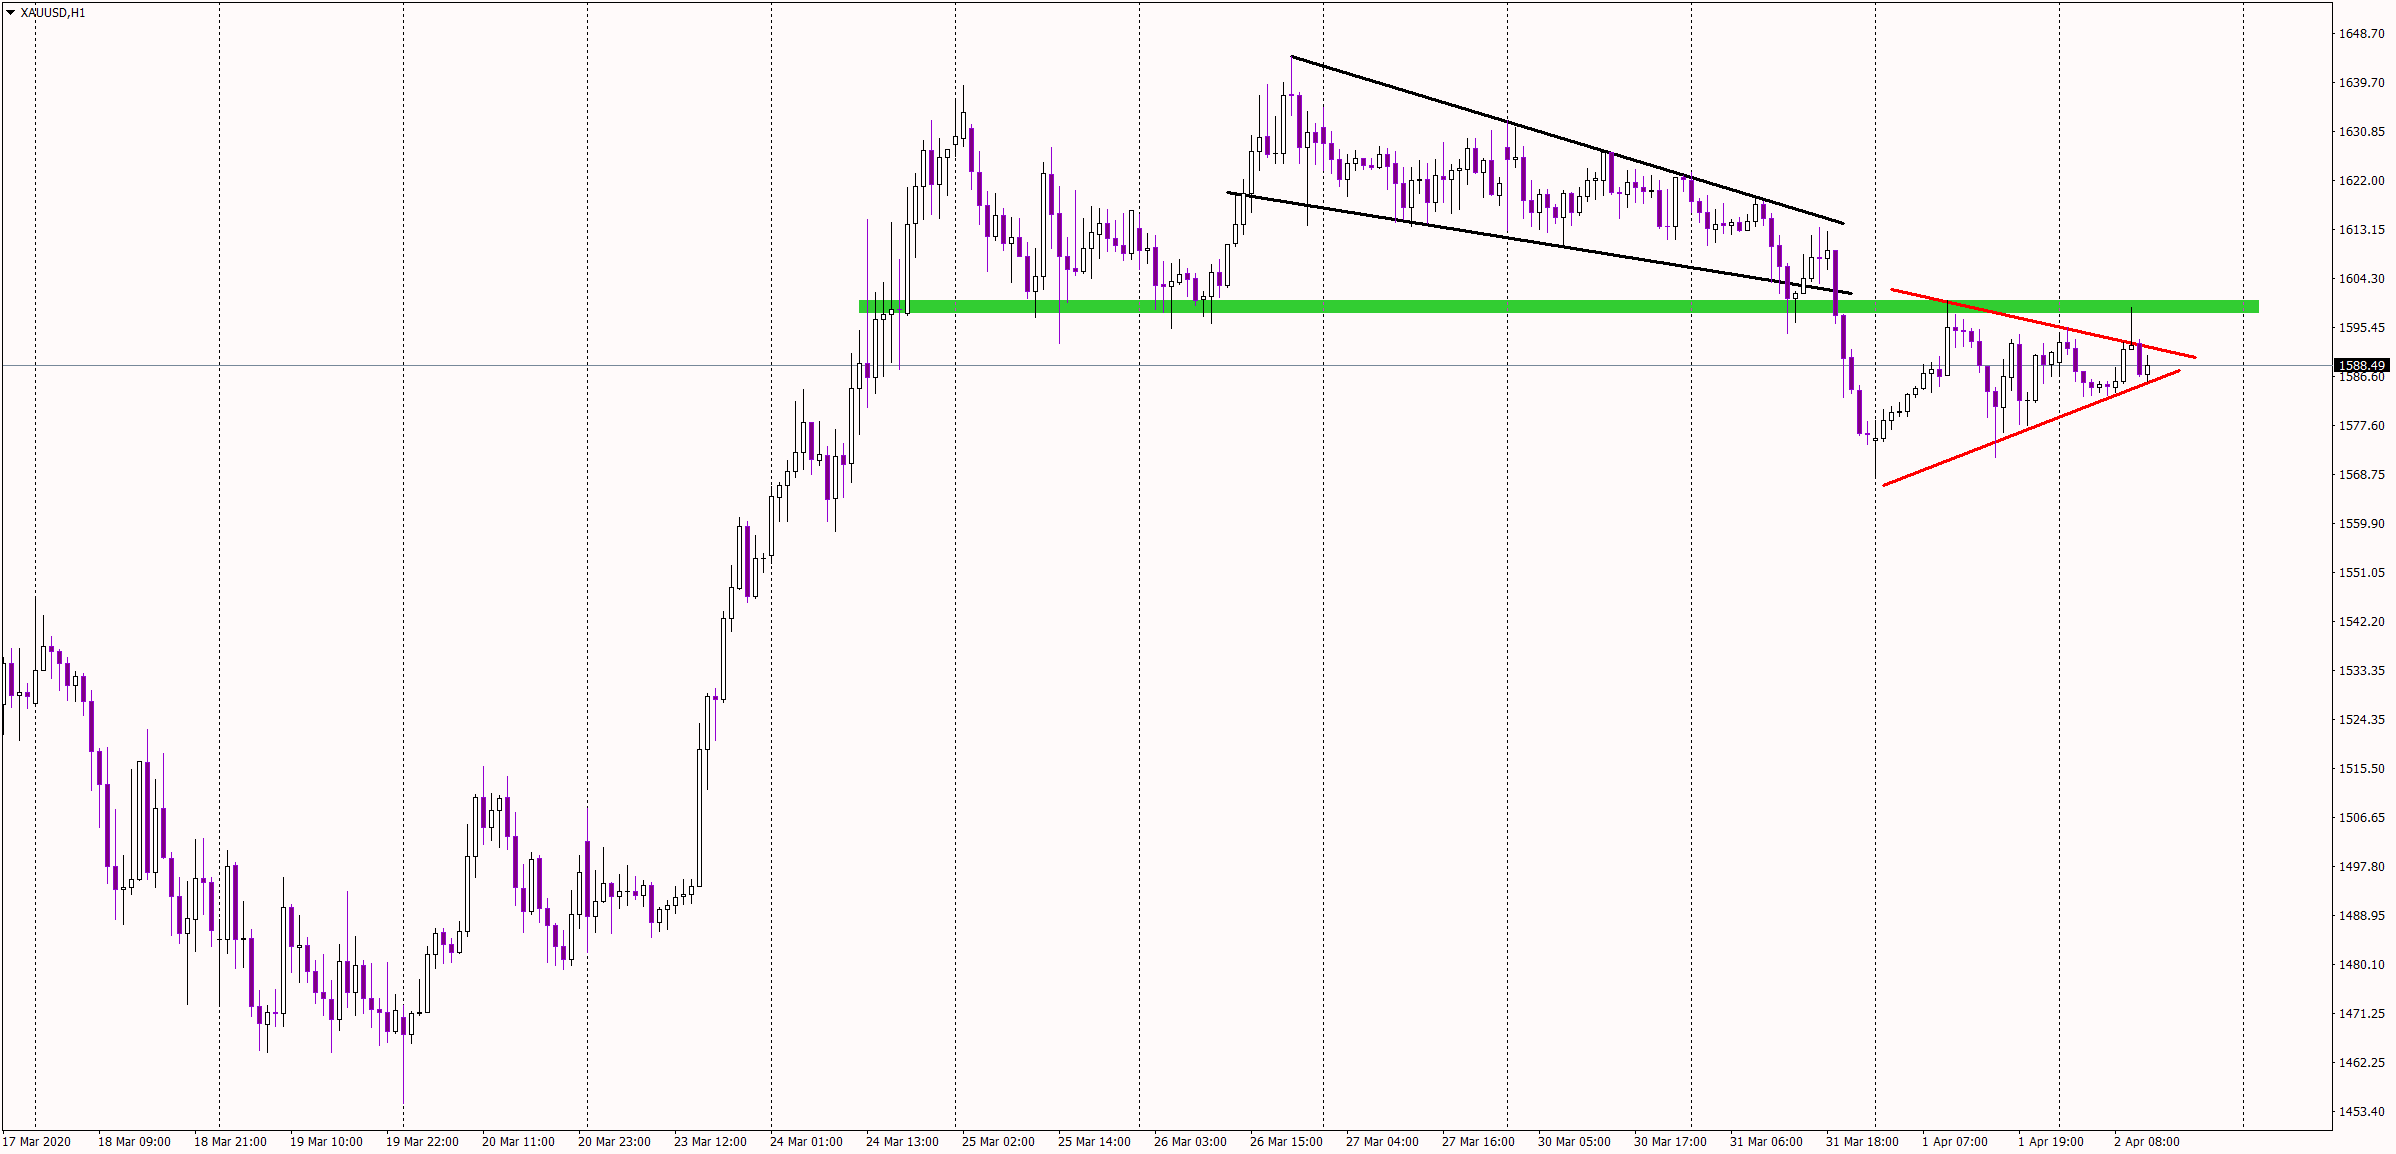 Gold 1 hour chart